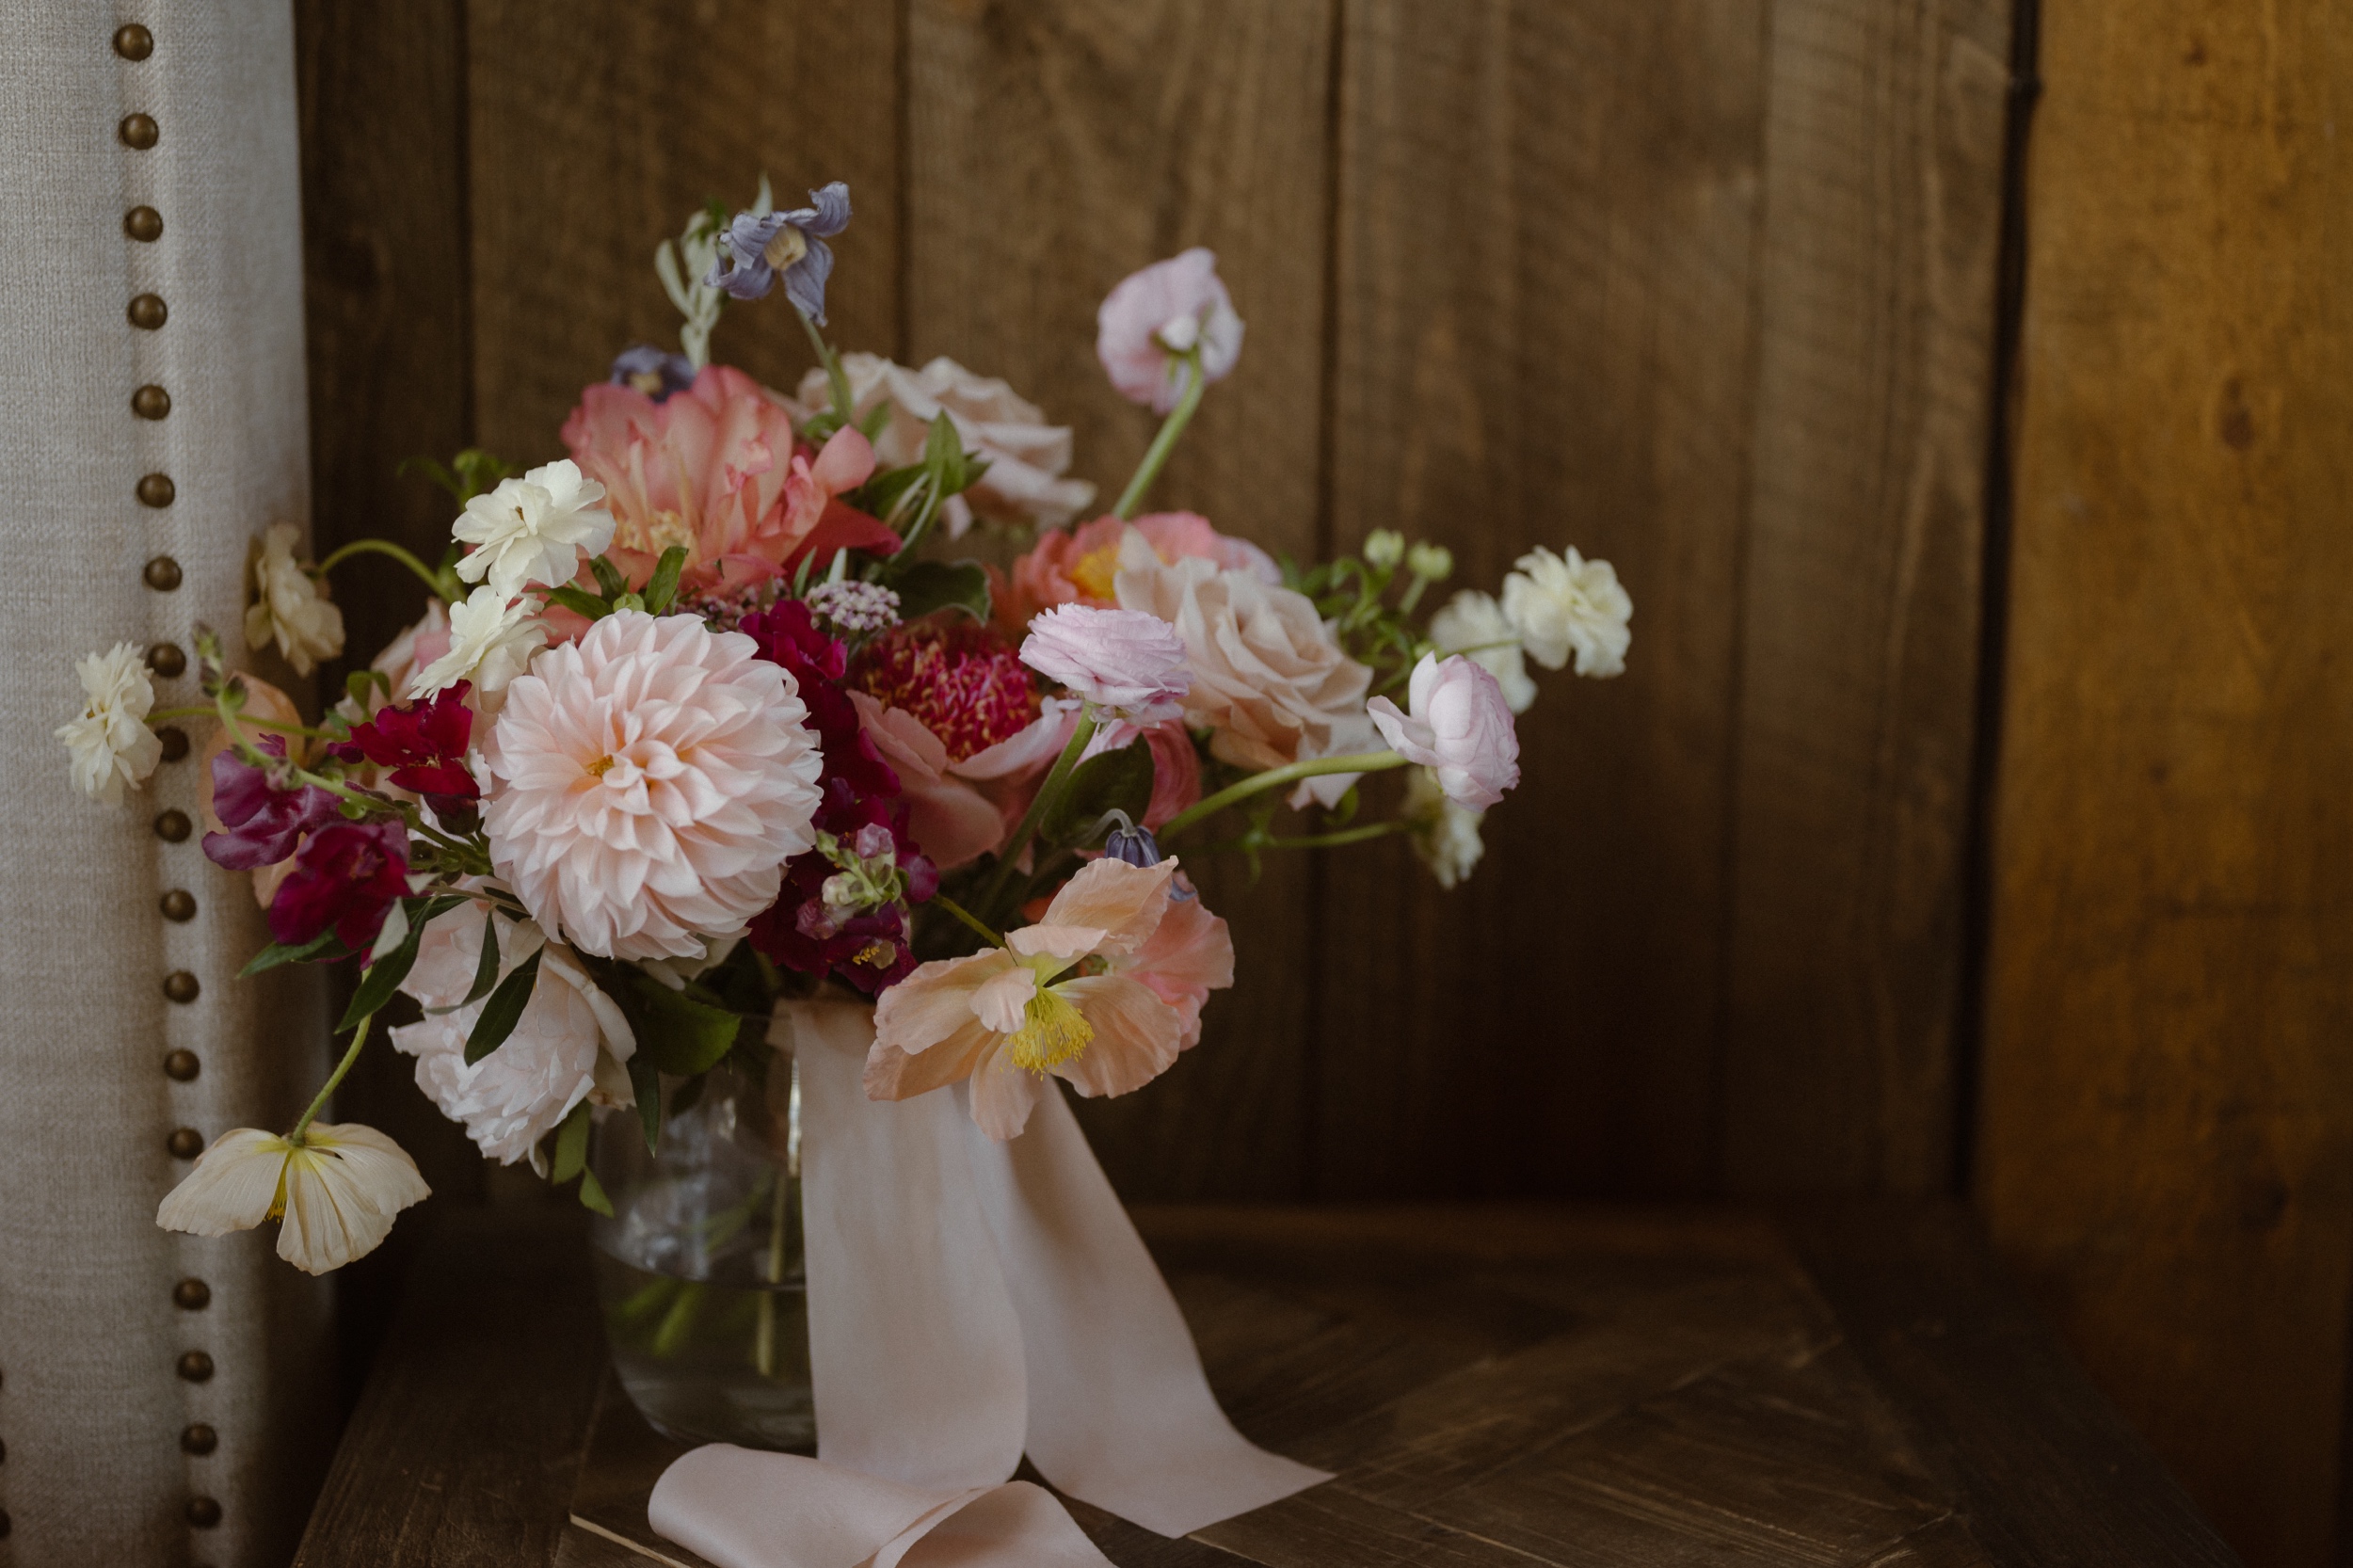 A photo of a bride's pink and white wedding bouquet set in a glass vase at Three Peaks Ranch. Photo by Ashley Joyce.